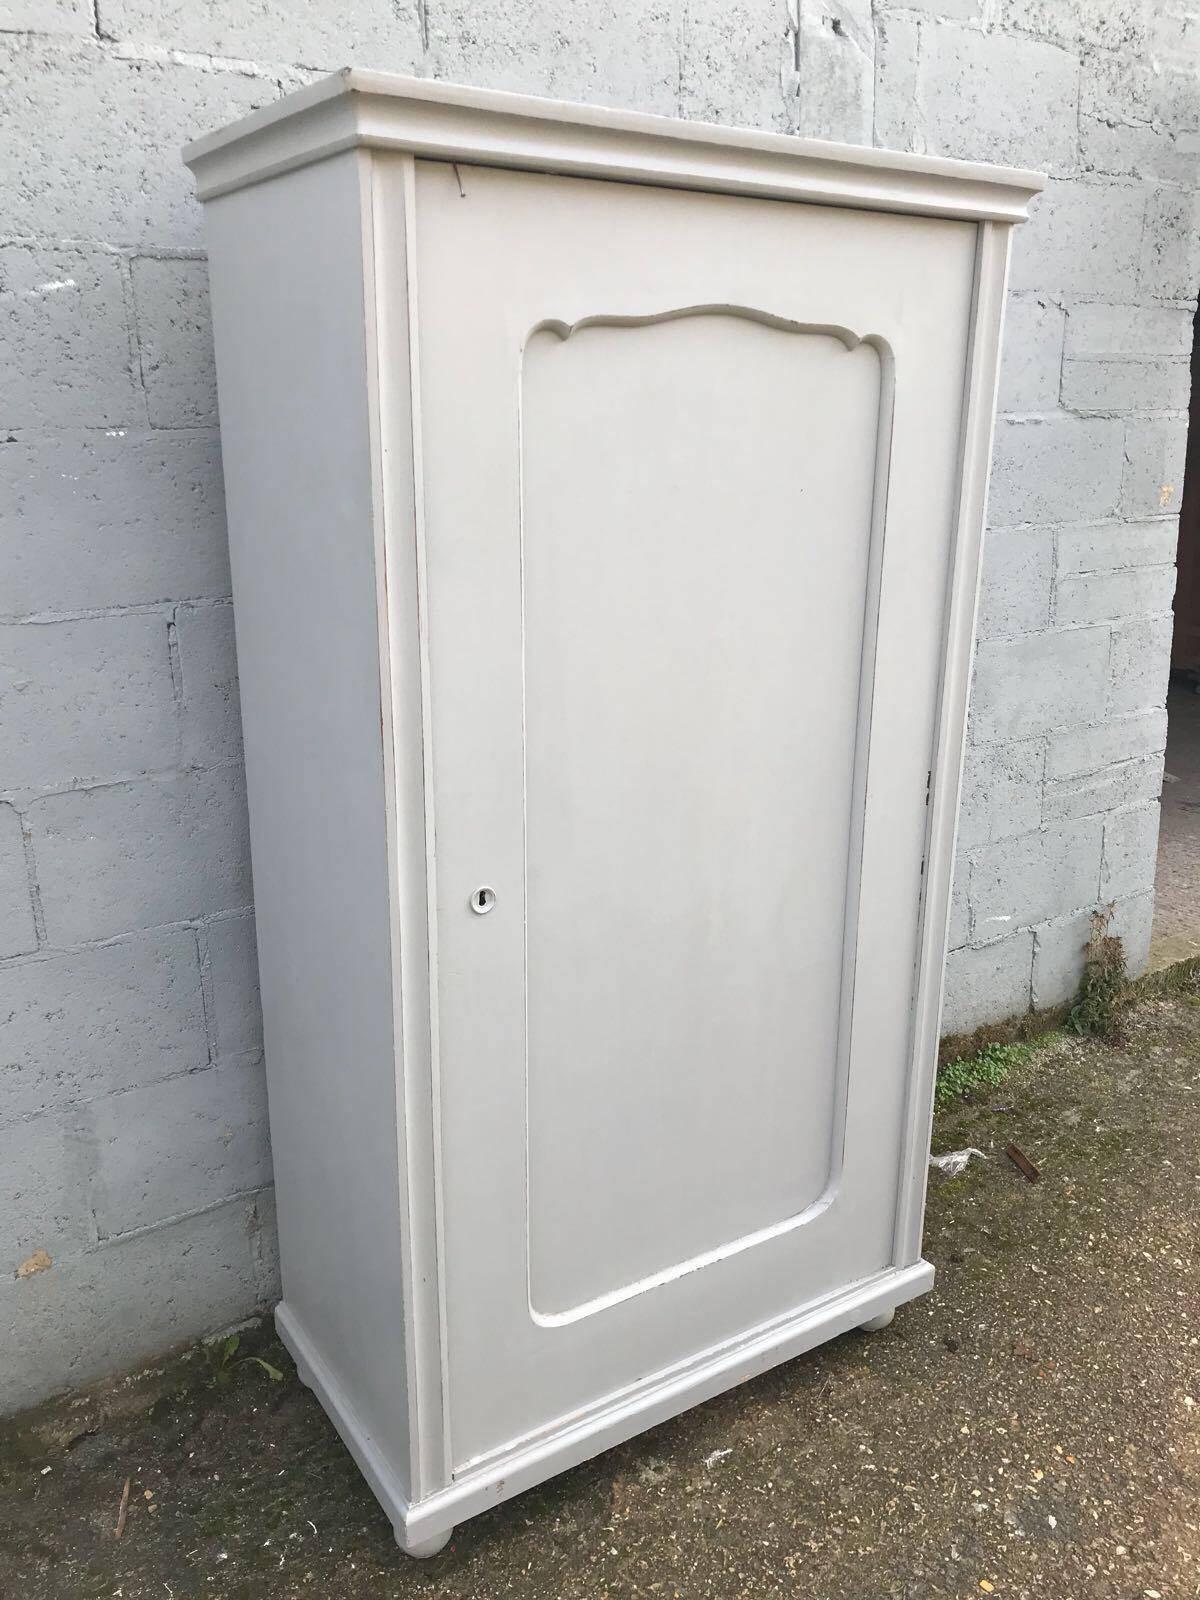 This is a beautiful French larder/cupboard or wardrobe.
It's been painted in grey colour, slightly distressed.
Single carved door opens up to good storage. Can be fitted with shelves or hanging rails as an extra, if needed.
Dimensions- 62cm wide,